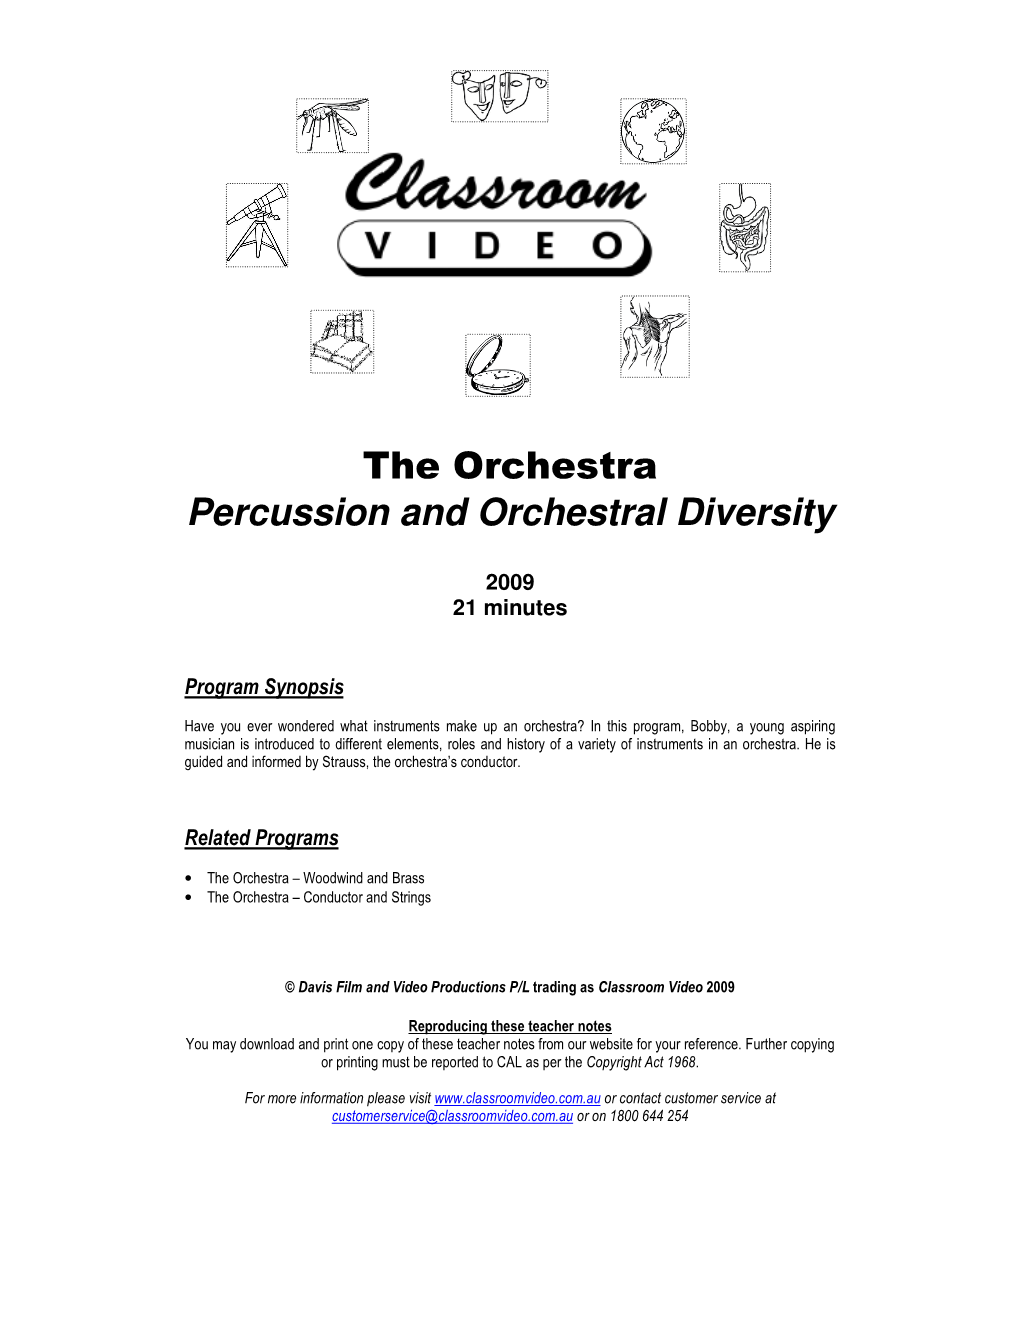 The Orchestra Percussion and Orchestral Diversity